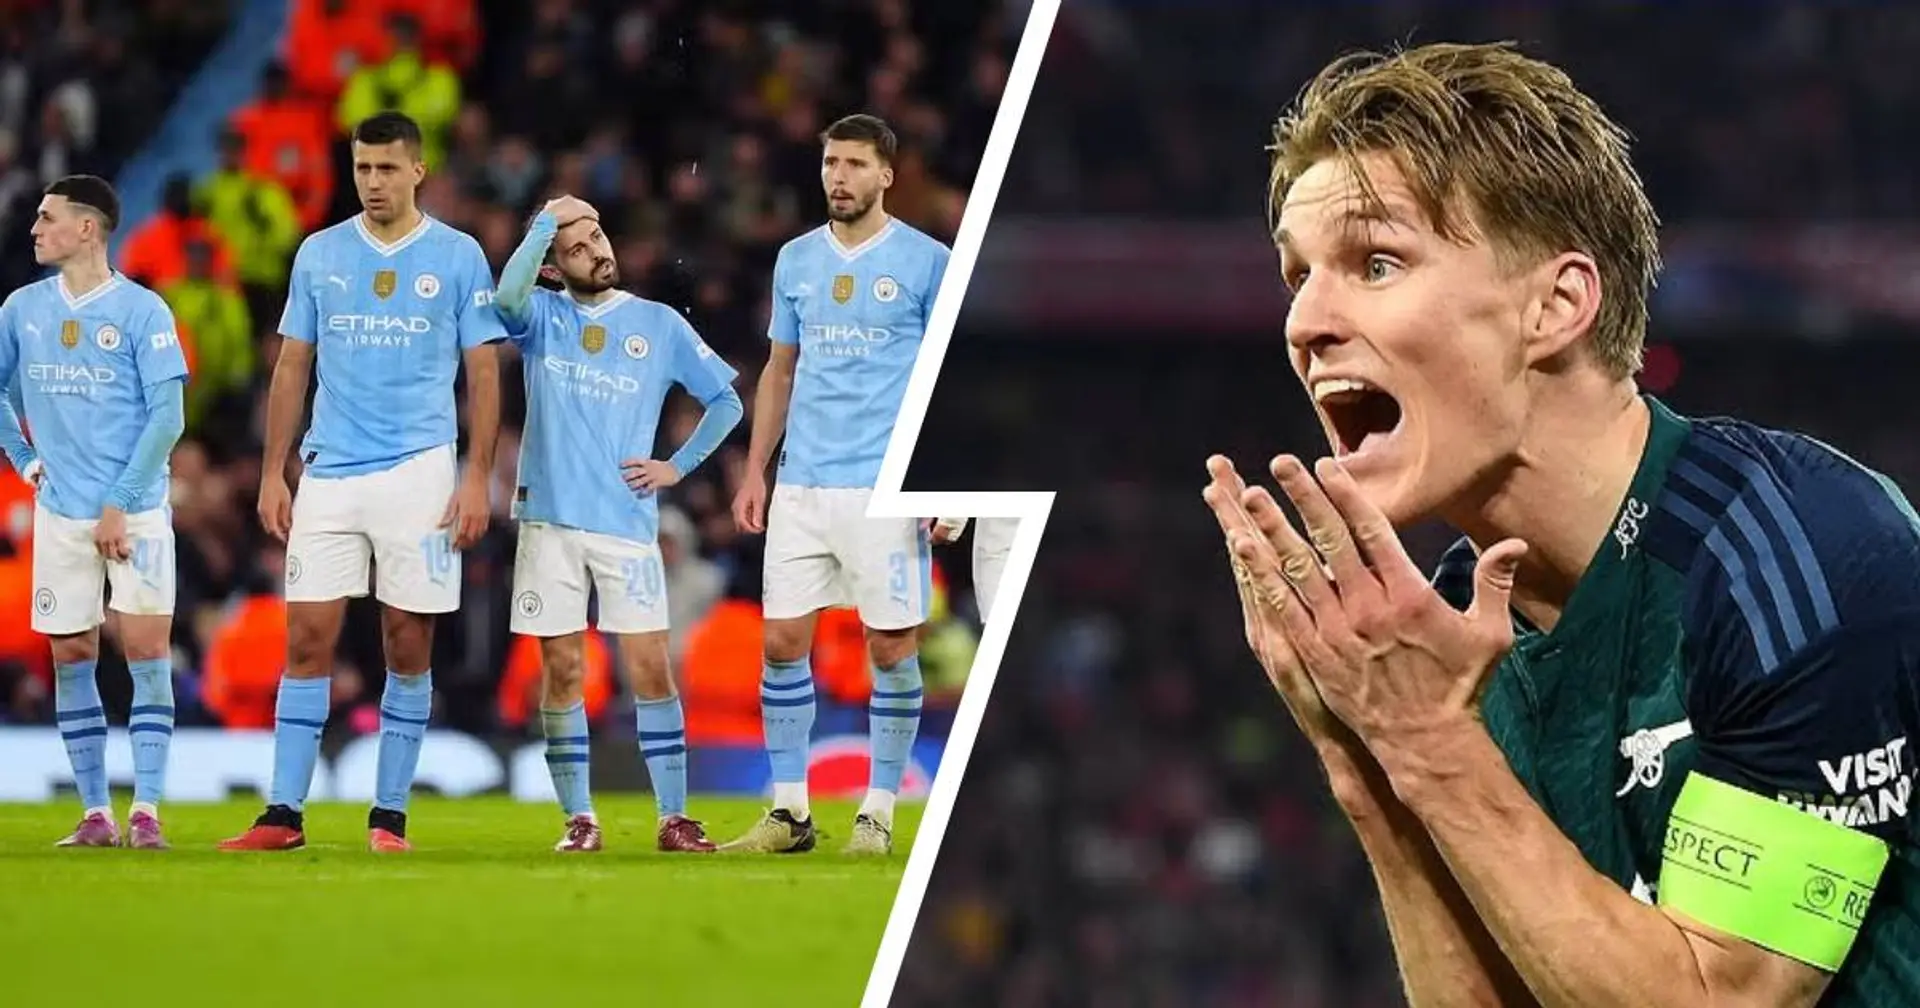 Man City and Arsenal knocked out of Champions League on same evening